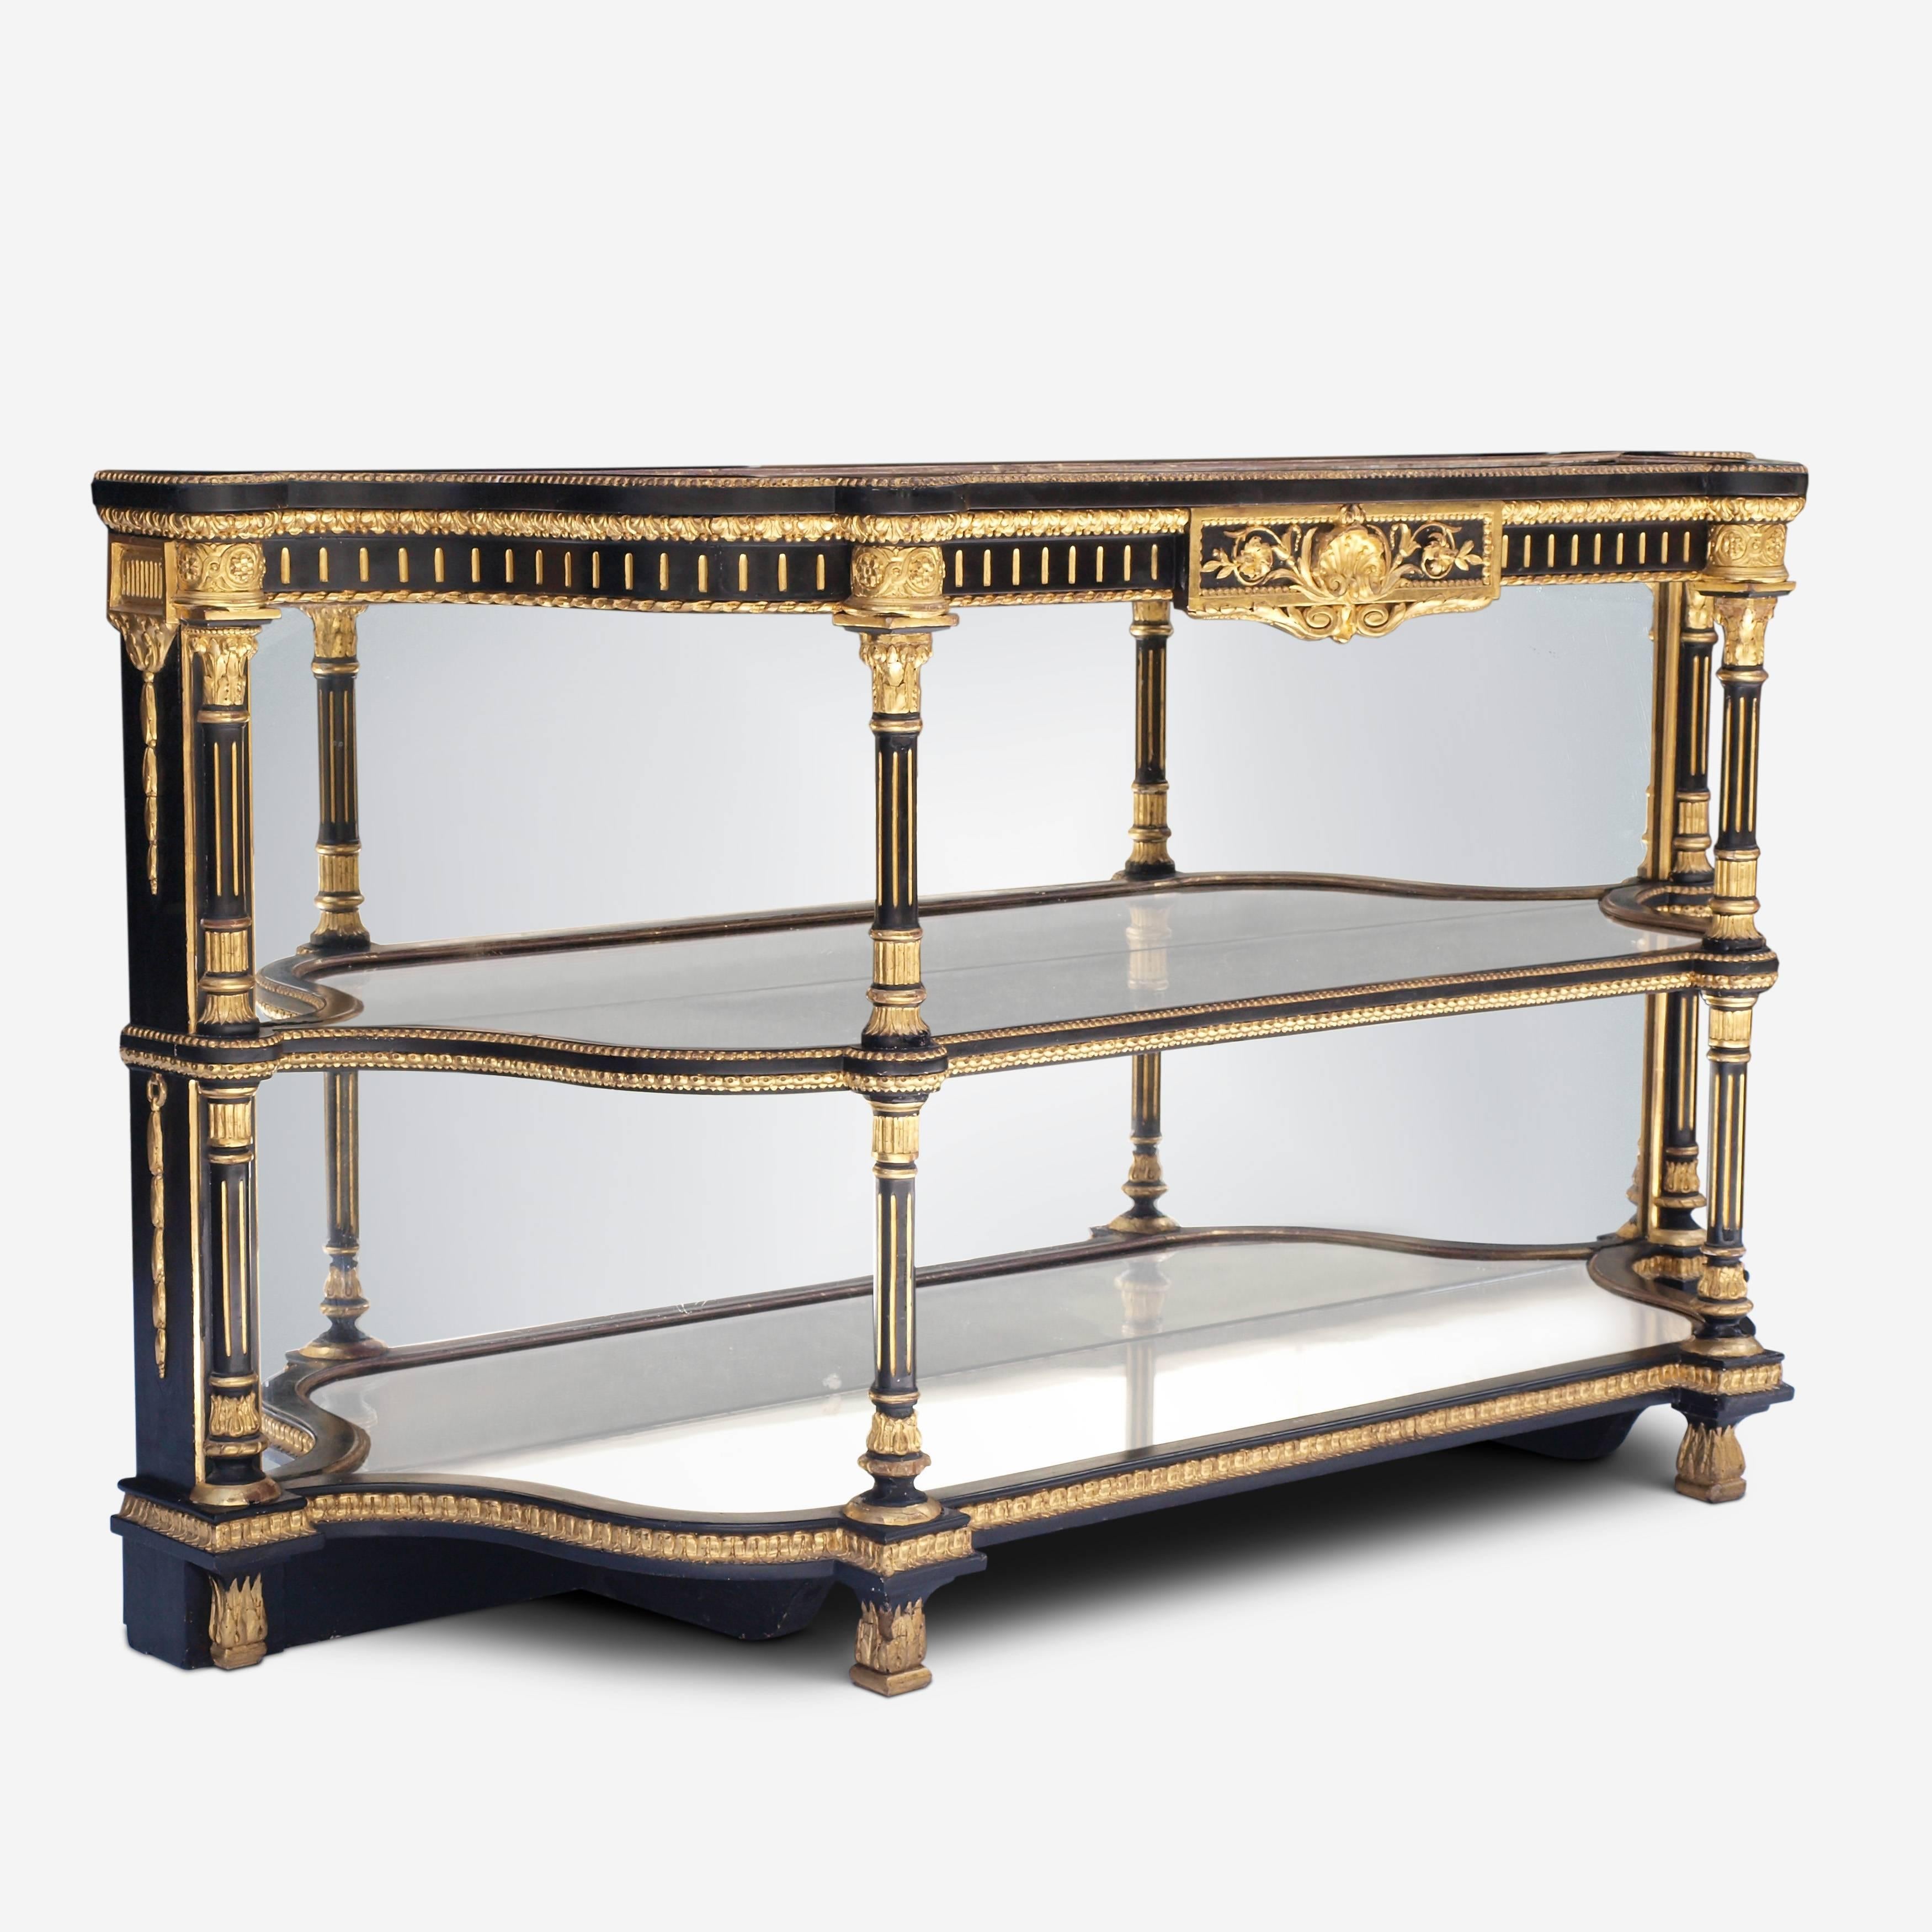 An important side cabinet by Charles Nosotti, one of the most significant suppliers of mirrors and furniture in London in the middle of the nineteenth century. 

This striking d shaped cabinet is ebonised and gilded with a mirror back